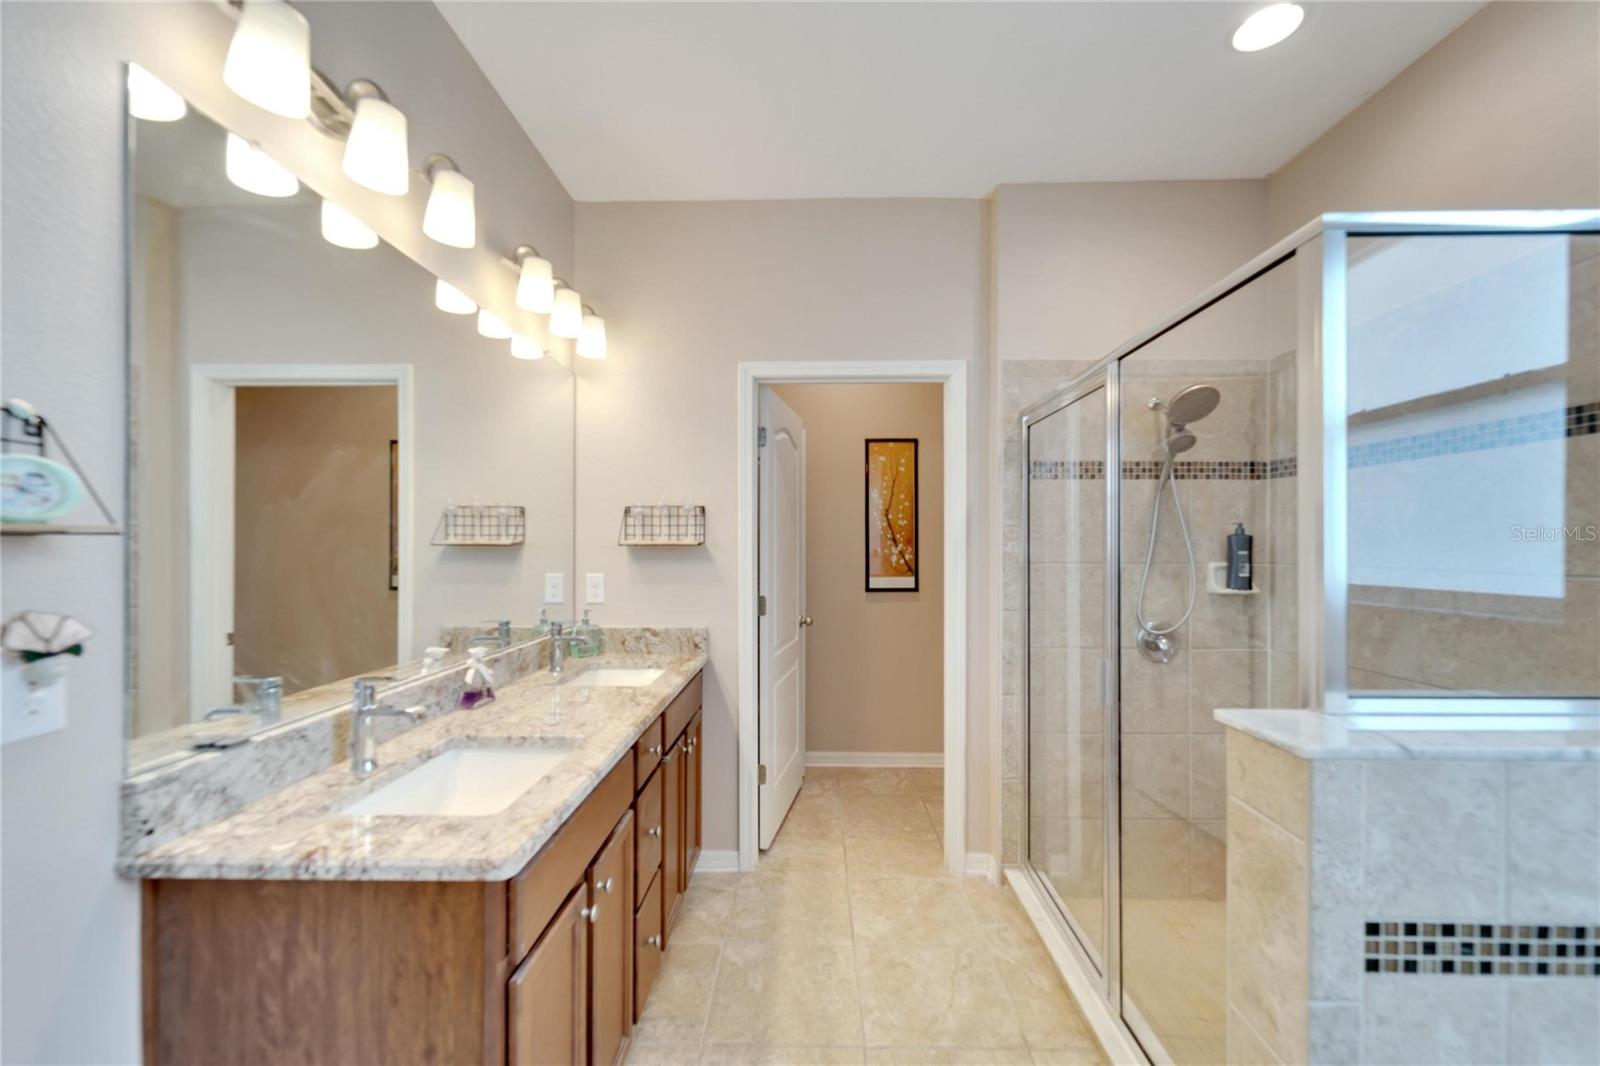 dual sinks, soaking tub and shower